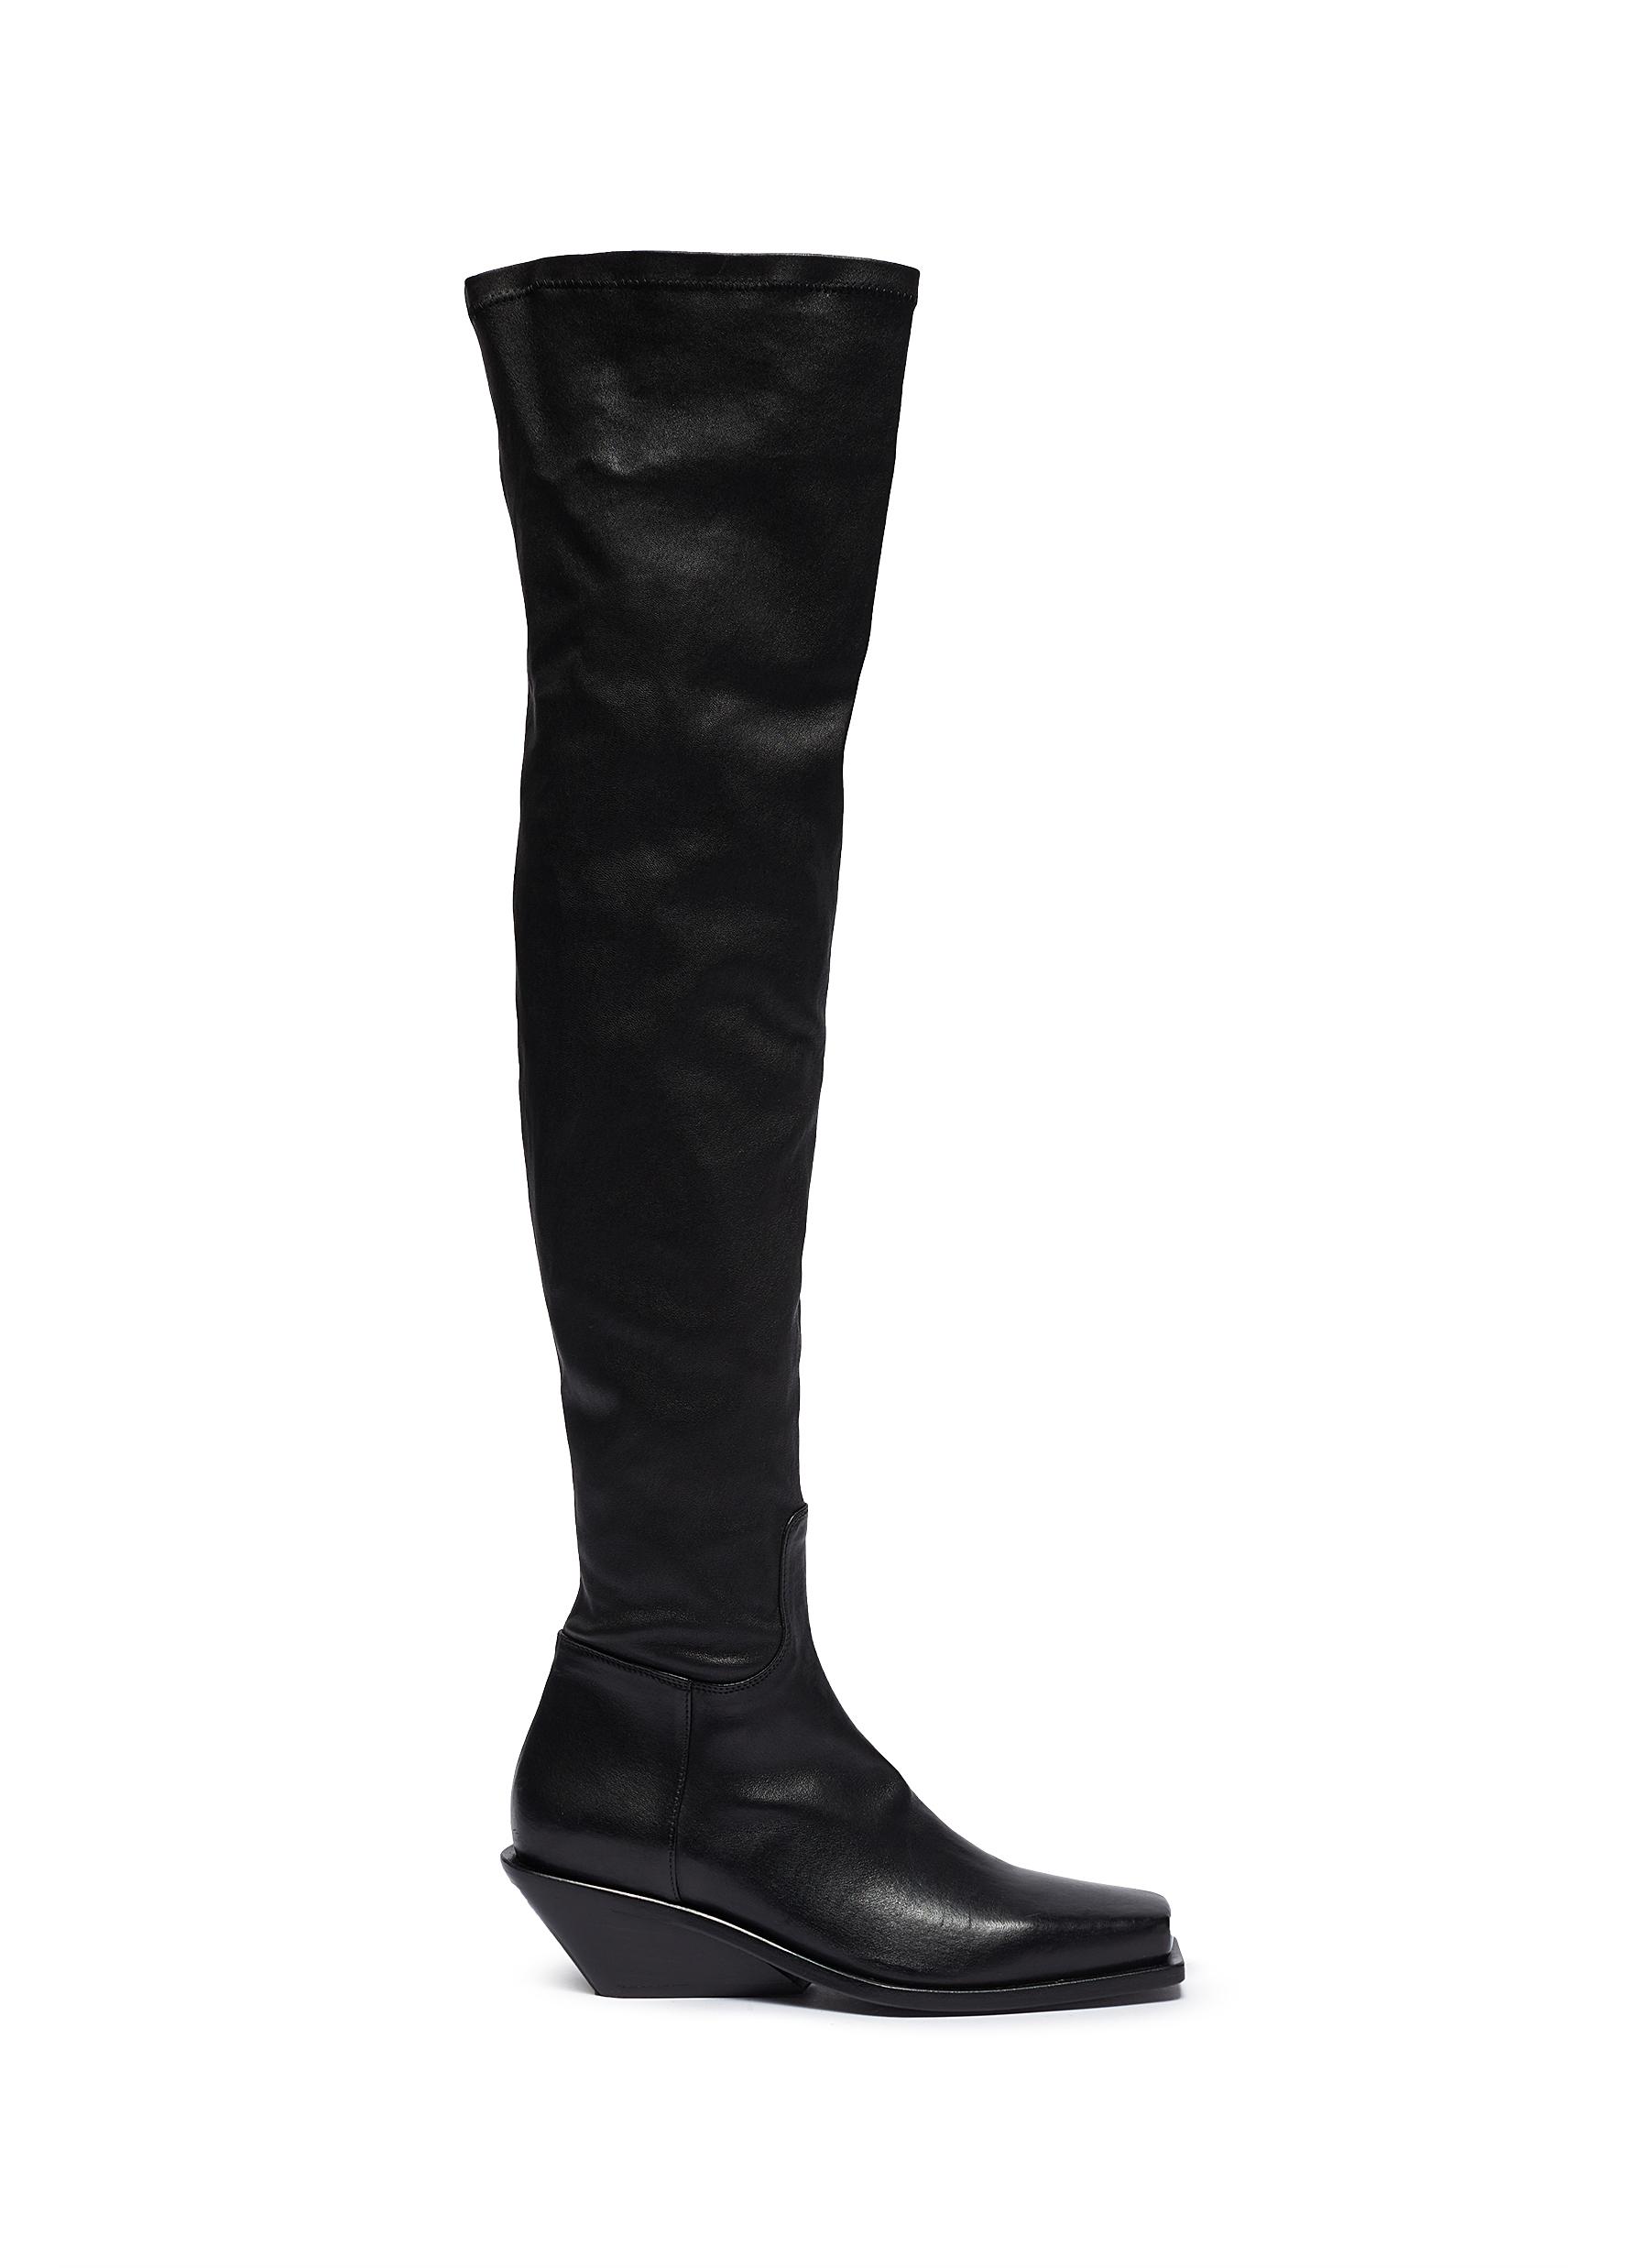 Square toe platform leather thigh high boots by Ann Demeulemeester